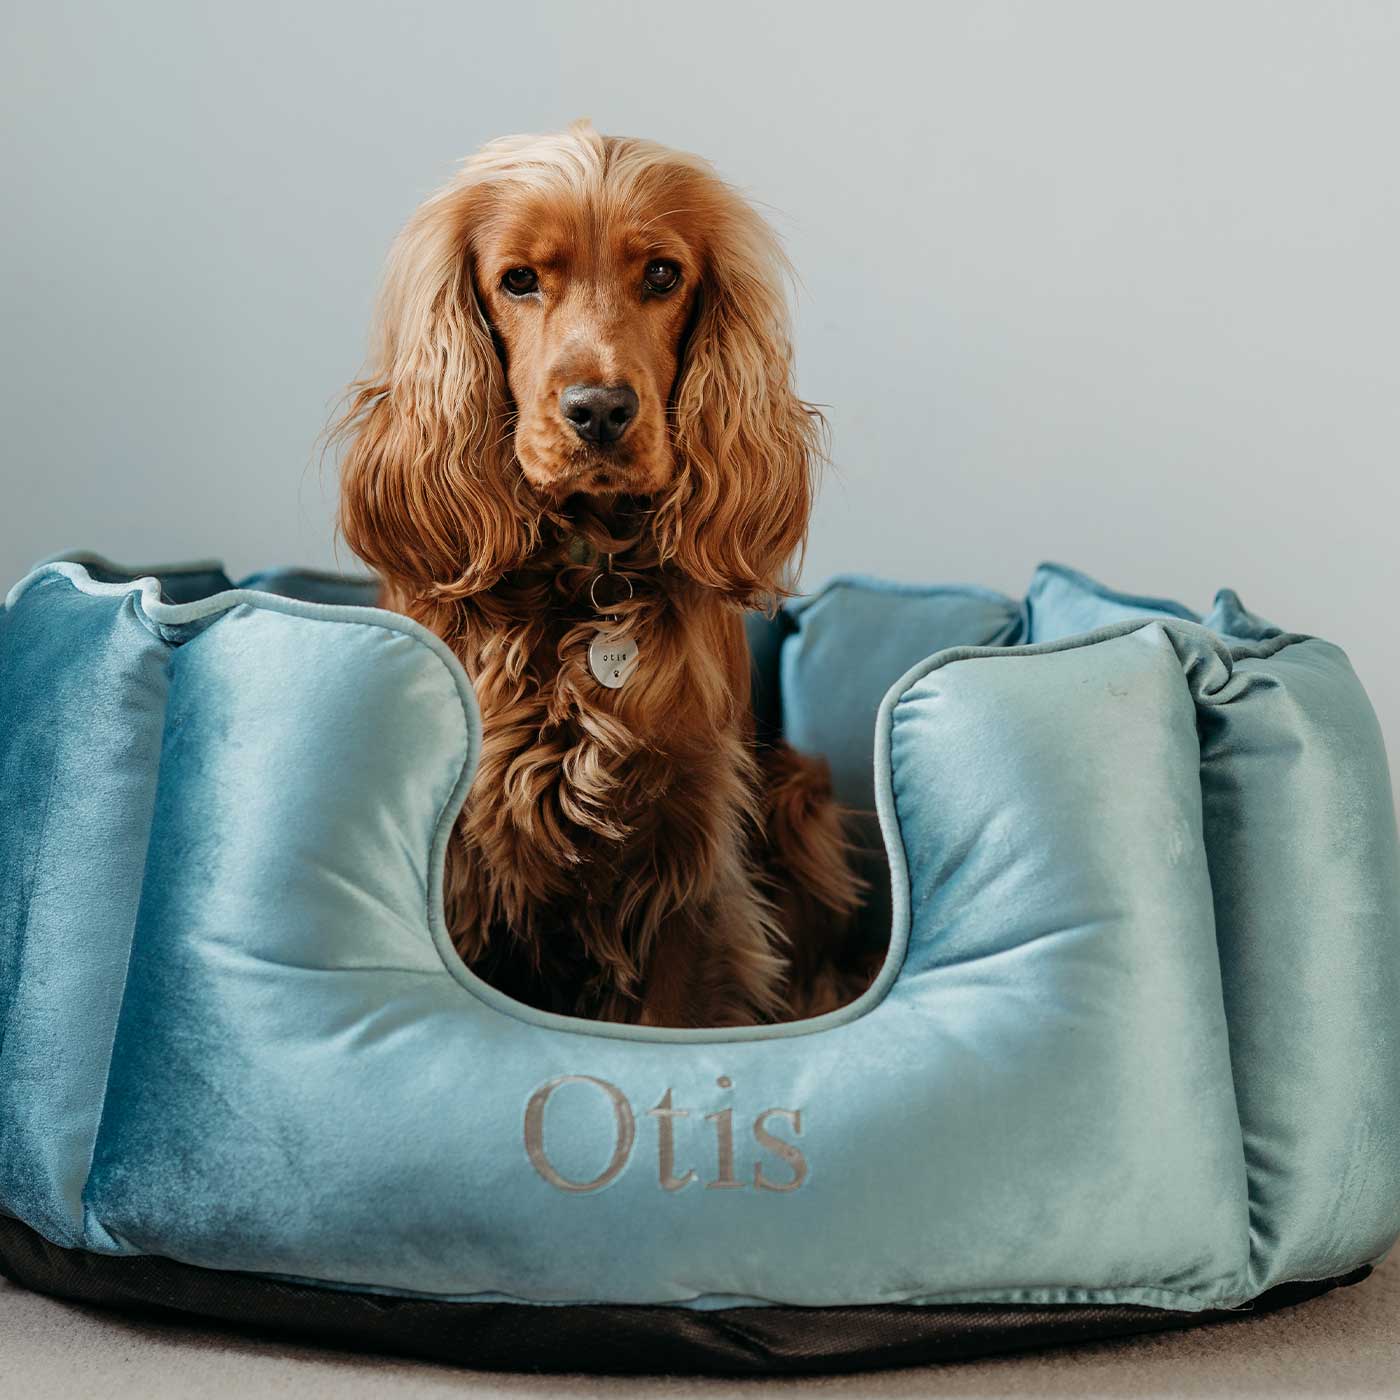 Discover Our Luxurious High Wall Bed For Dogs, Featuring inner pillow with plush teddy fleece on one side To Craft The Perfect Dogs Bed In Stunning Duck Egg Velvet! Available To Personalise Now at Lords & Labradors    